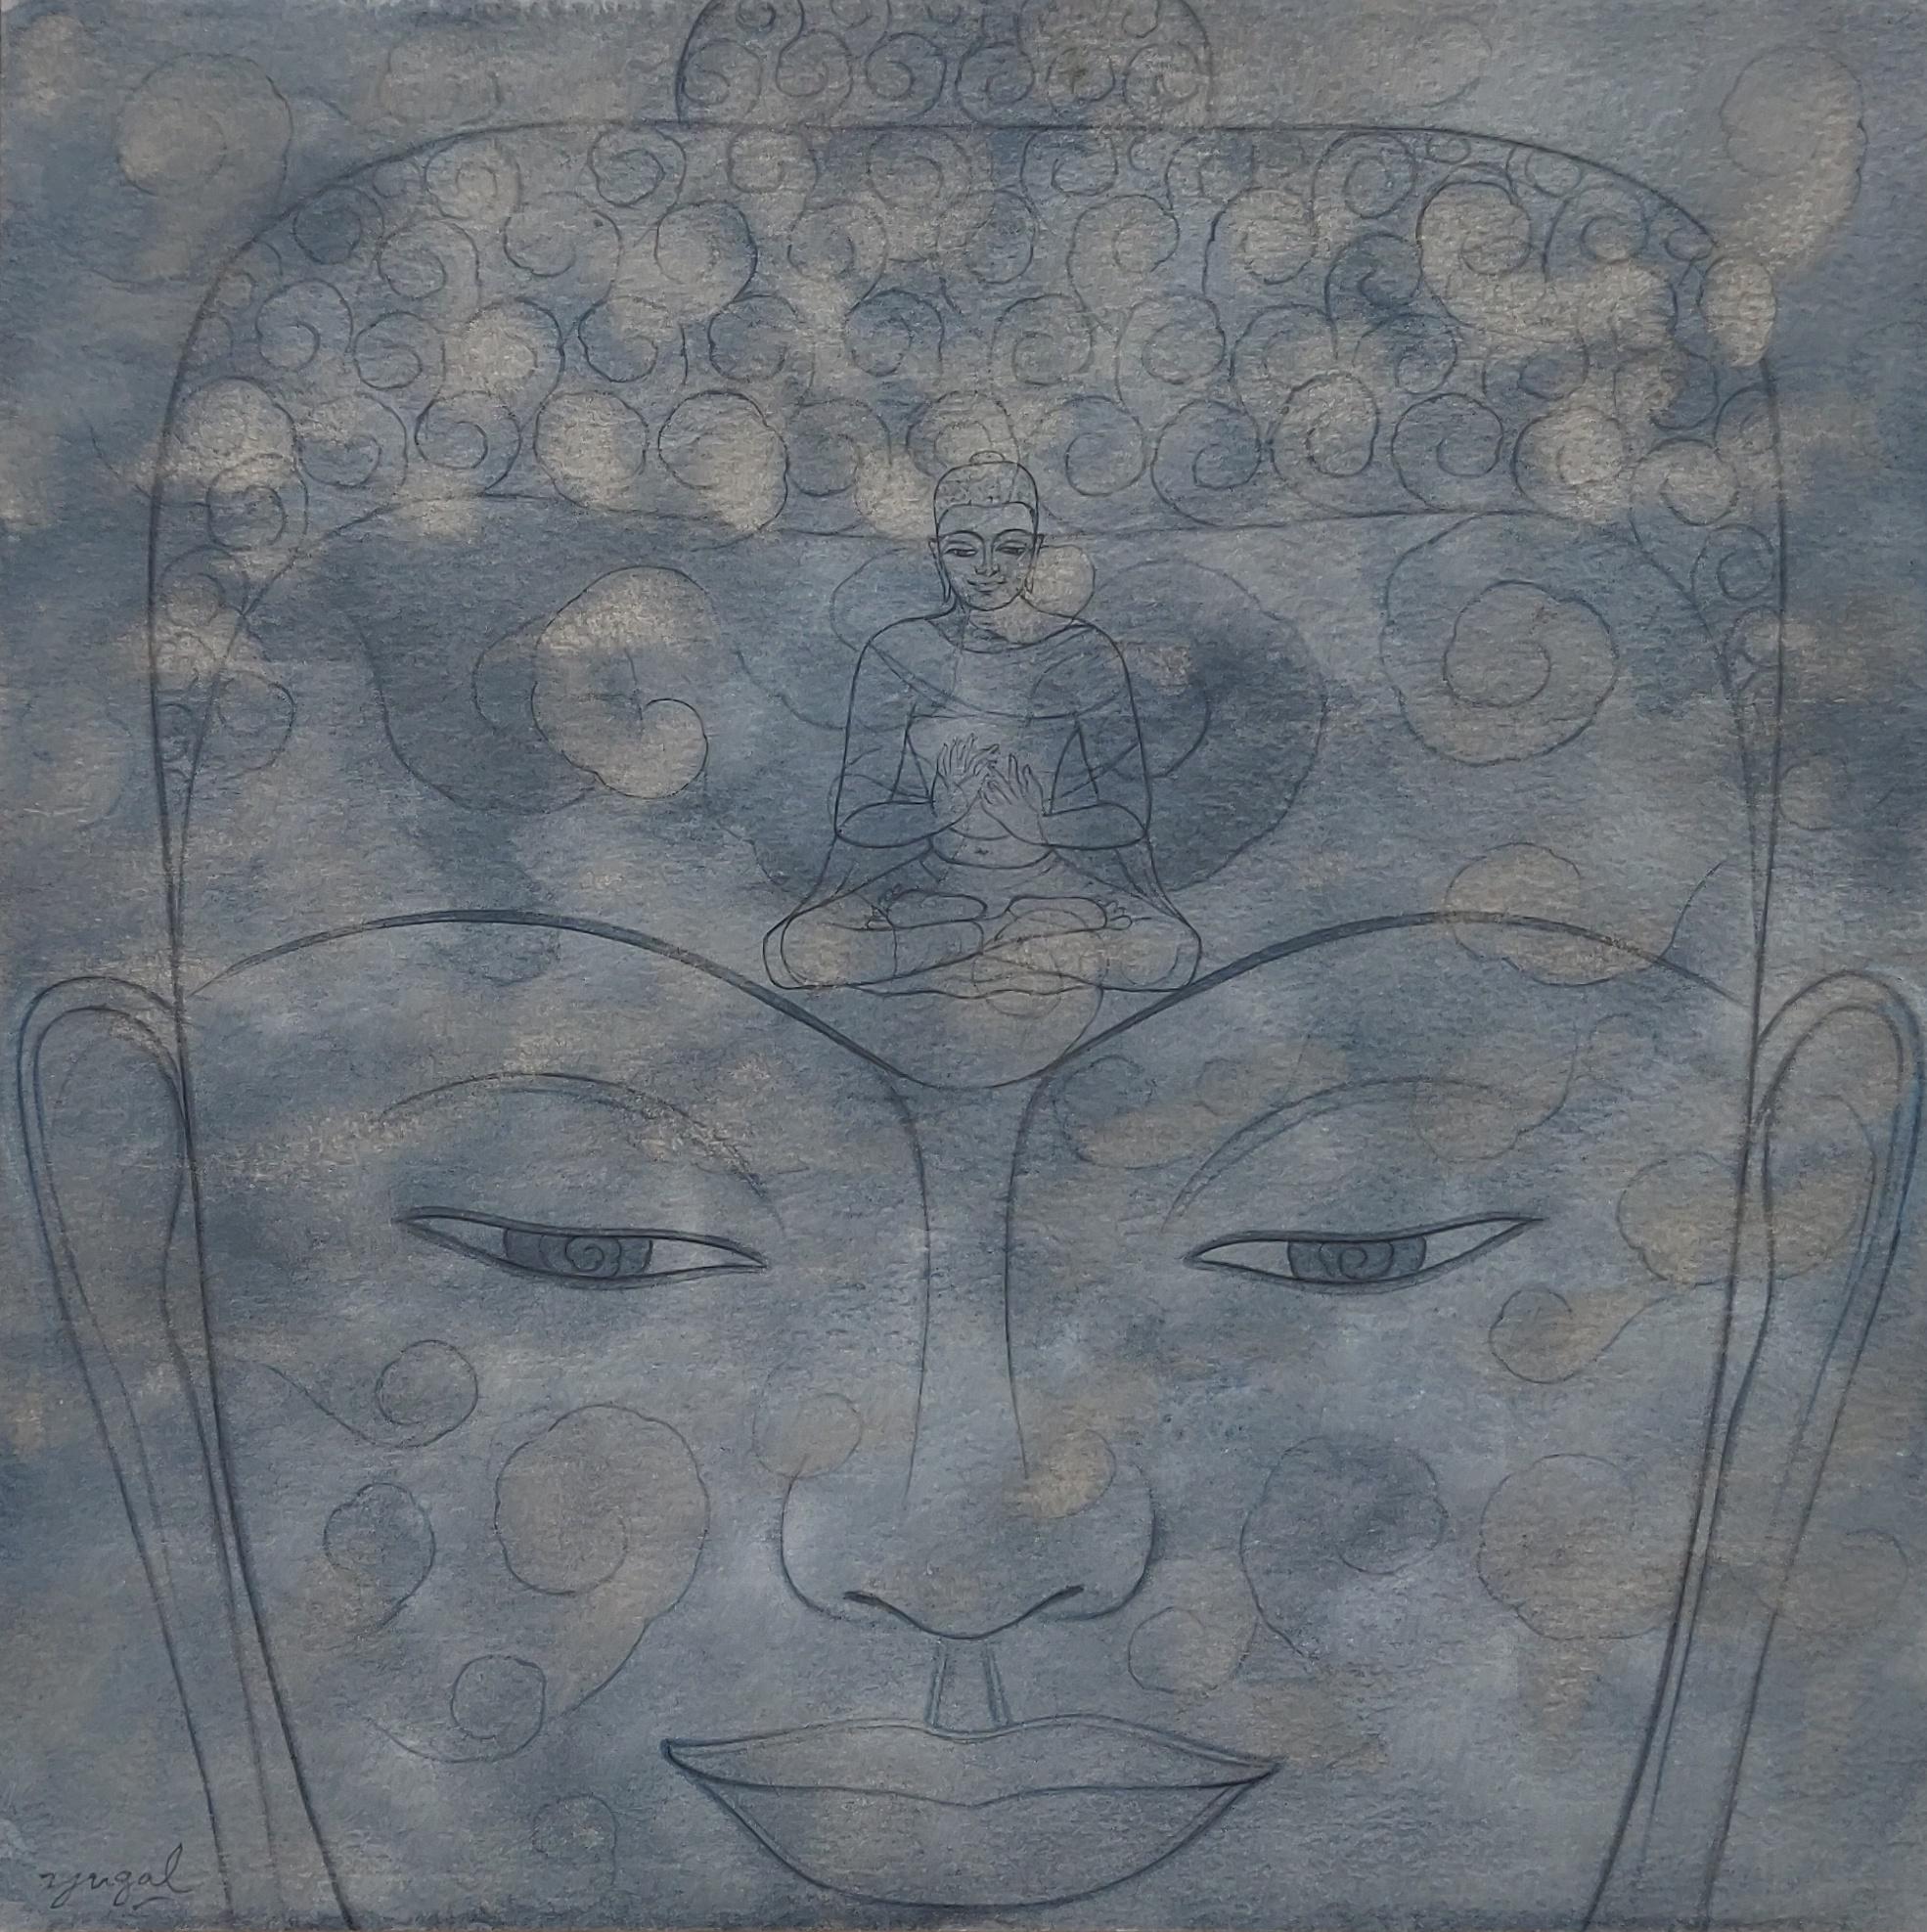 Yugal Kishor Sharma Figurative Painting - Buddha, God, Watercolor, Silver & Ink on Paper by Contemporary Artist "In Stock"